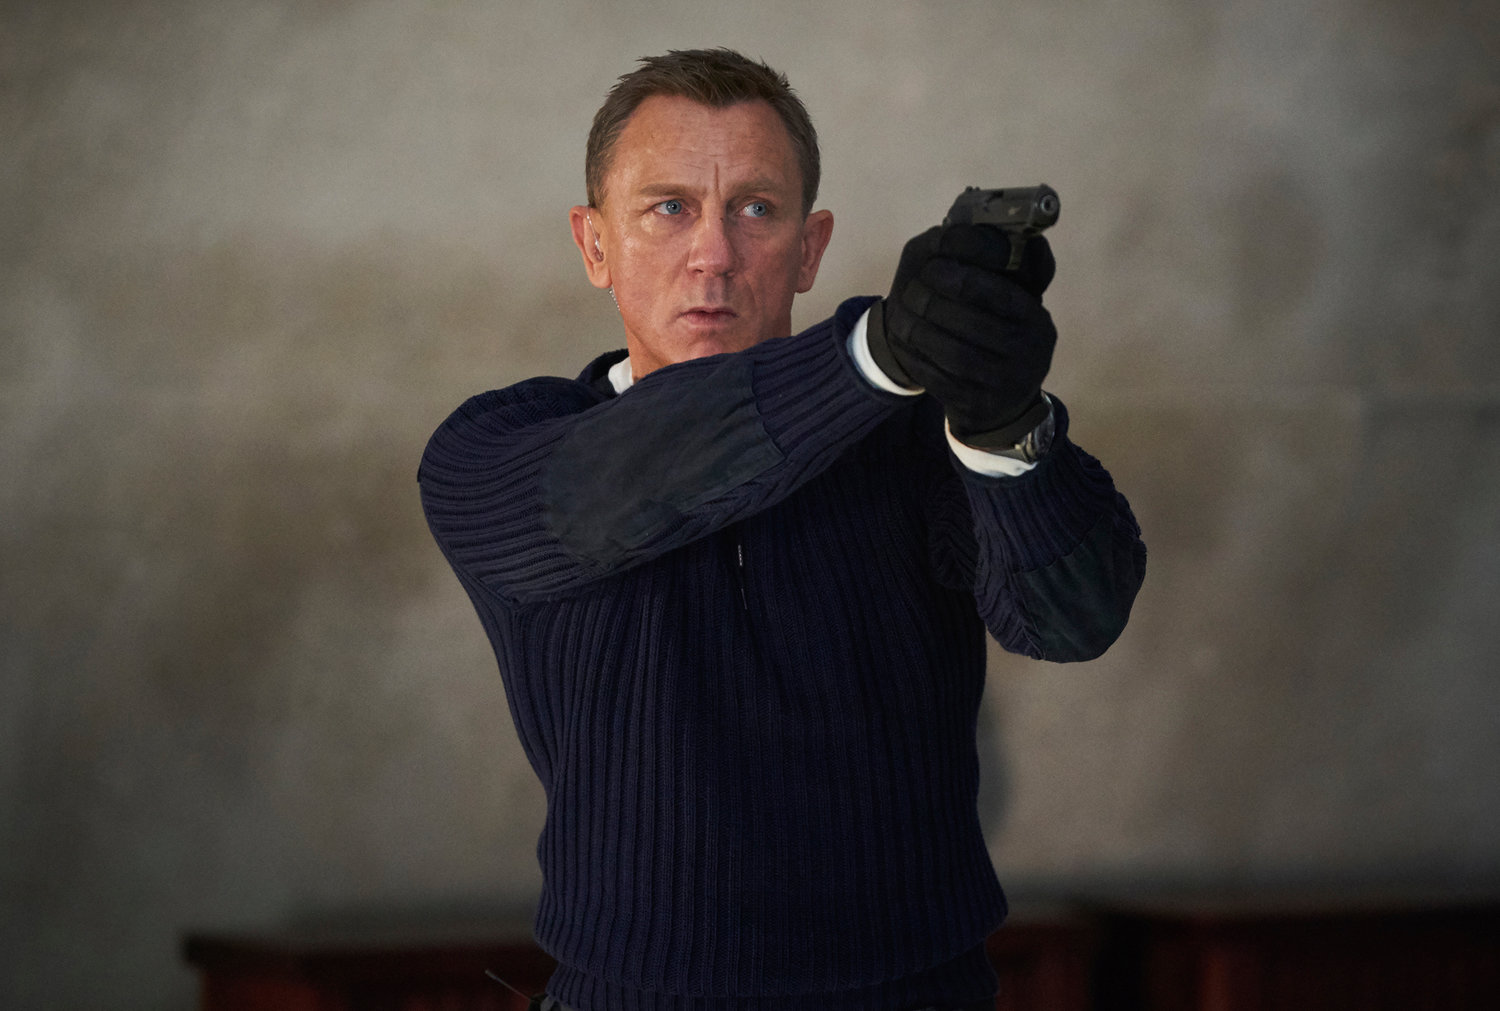 SAYING GOODBYE TO OO7 — This image released by Metro Goldwyn Mayer Pictures shows Daniel Craig in a scene from “No Time To Die.” The film is Craig’s last as the star of the James Bond franchise.